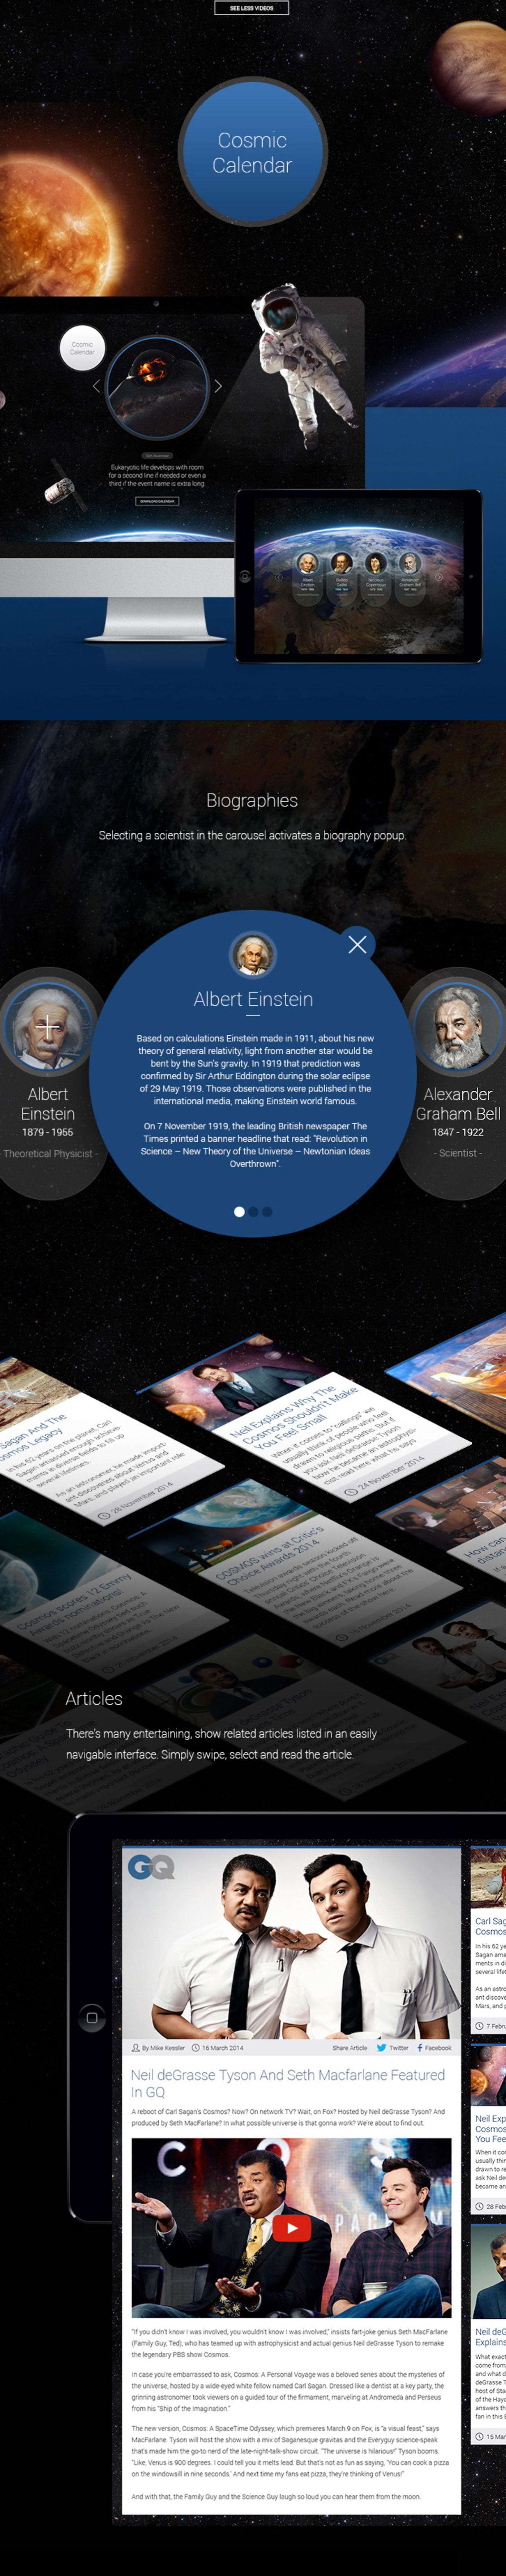 Website ux UI design Space  universe cosmos neil degrasse tyson national geographic